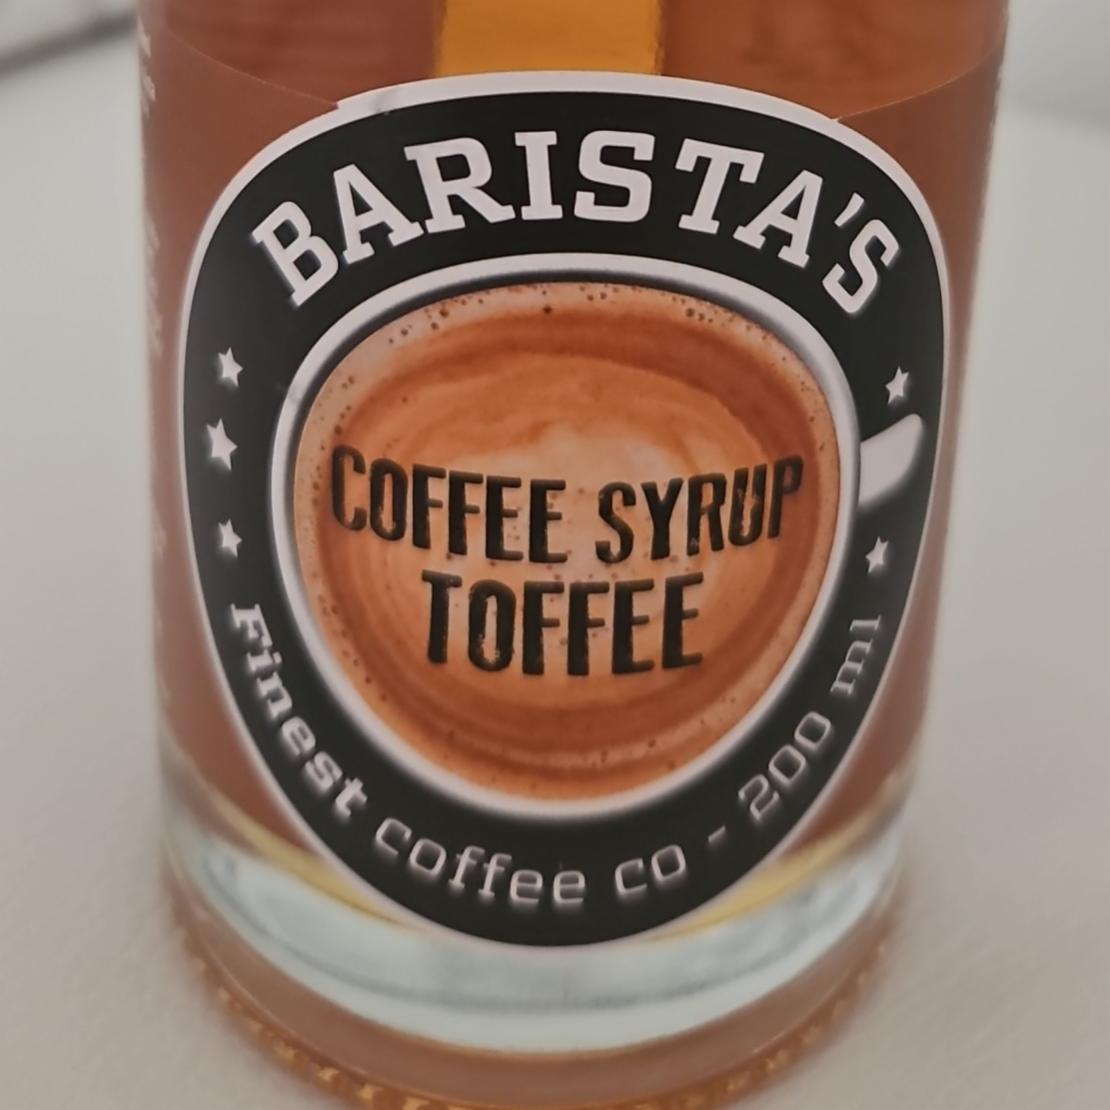 Fotografie - Coffee Syrup Toffee Barista's